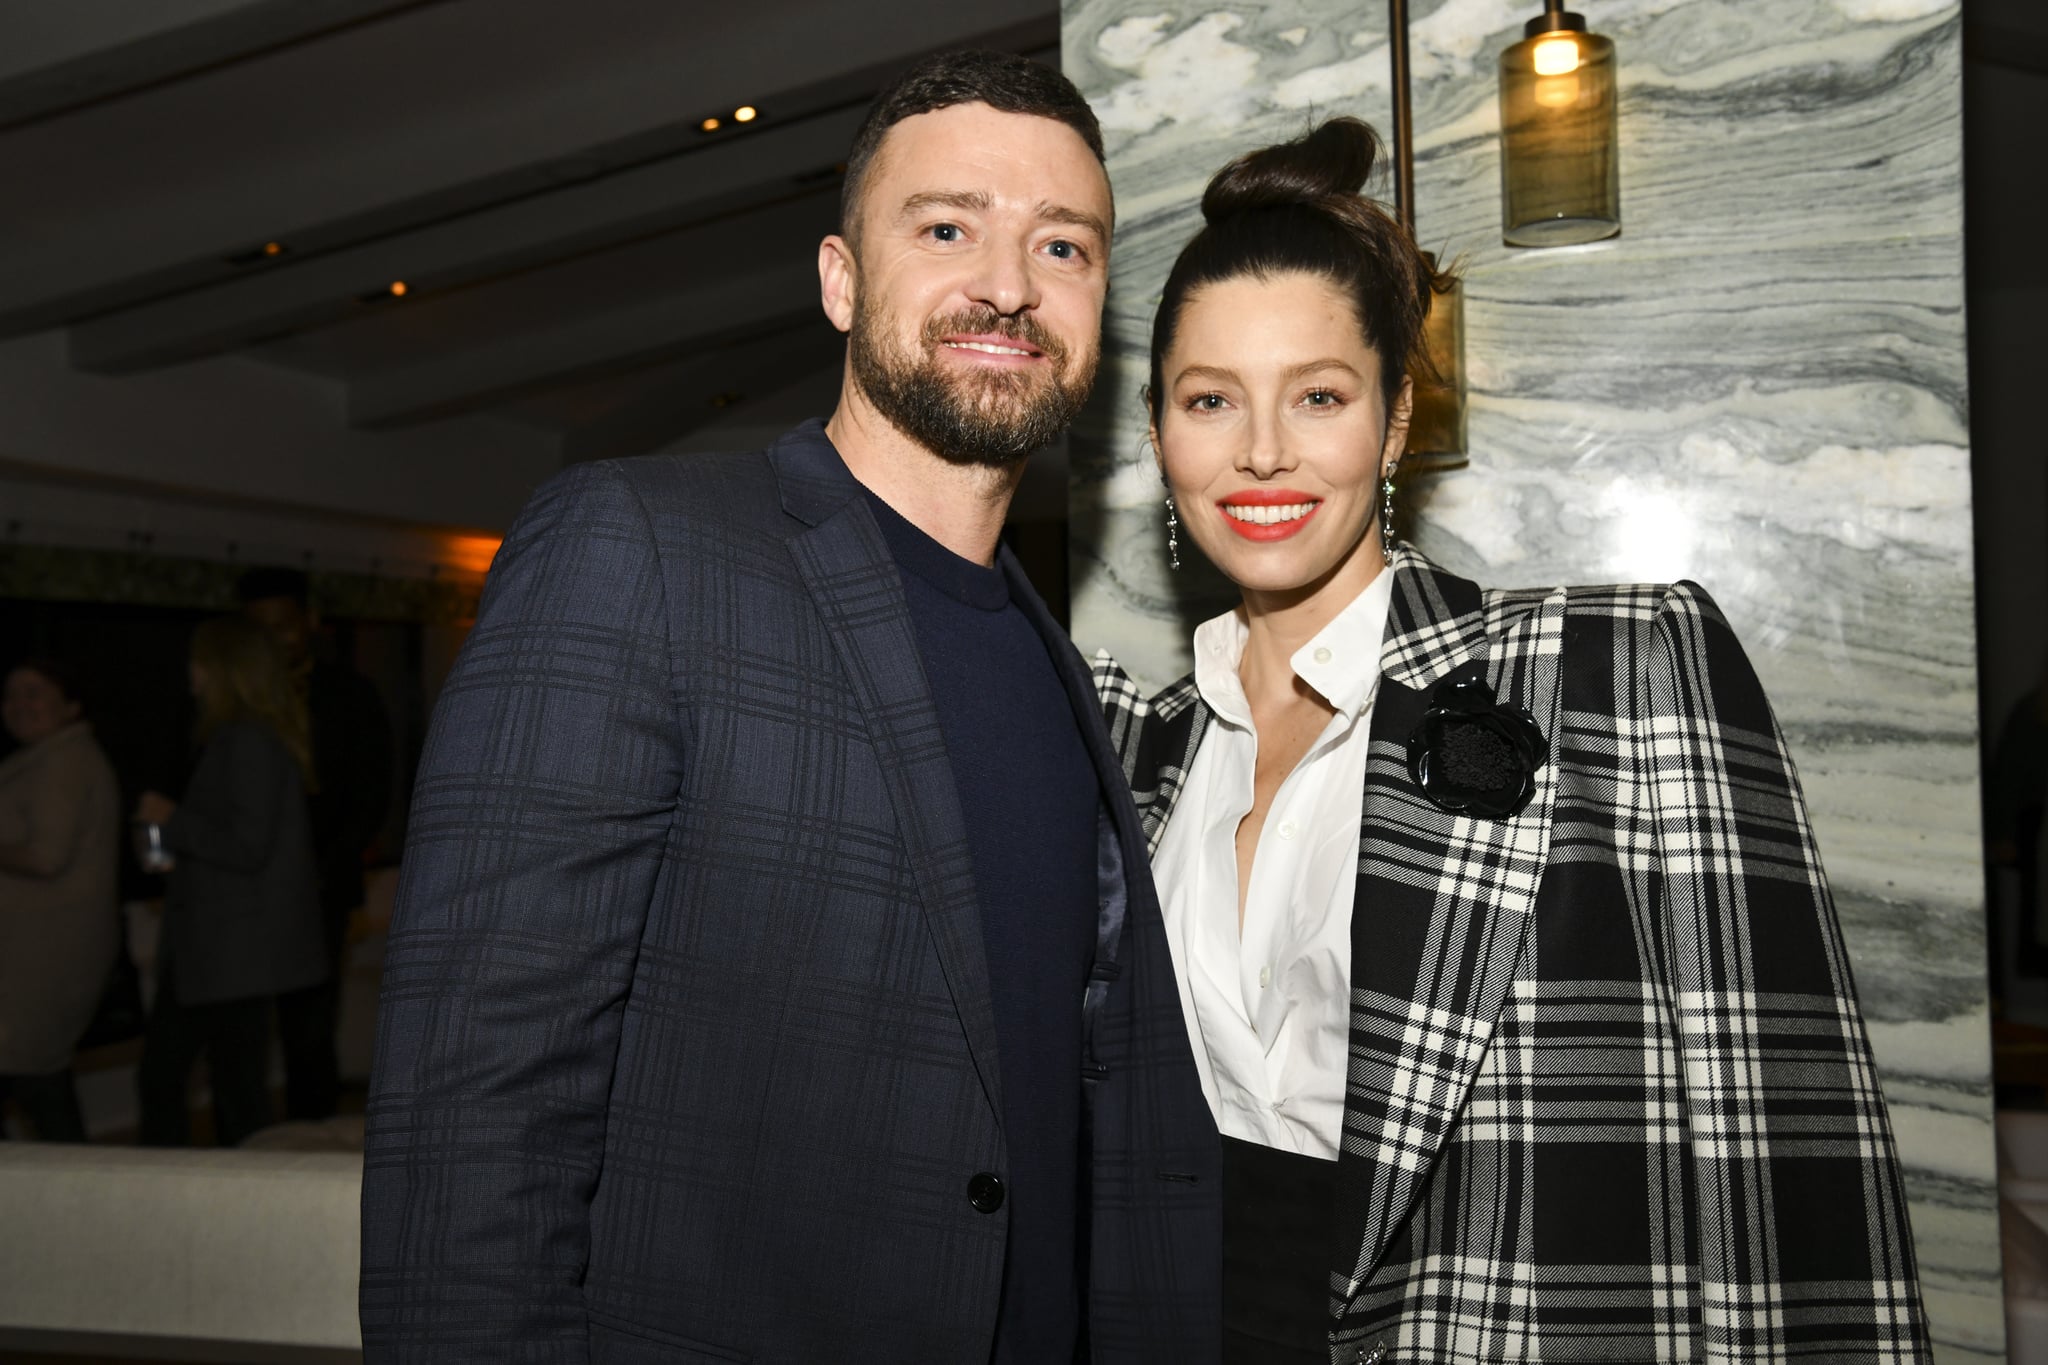 WEST HOLLYWOOD, CALIFORNIA - FEBRUARY 03: (L-R) Justin Timberlake and Jessica Biel pose for portrait at the Premiere of USA Network's